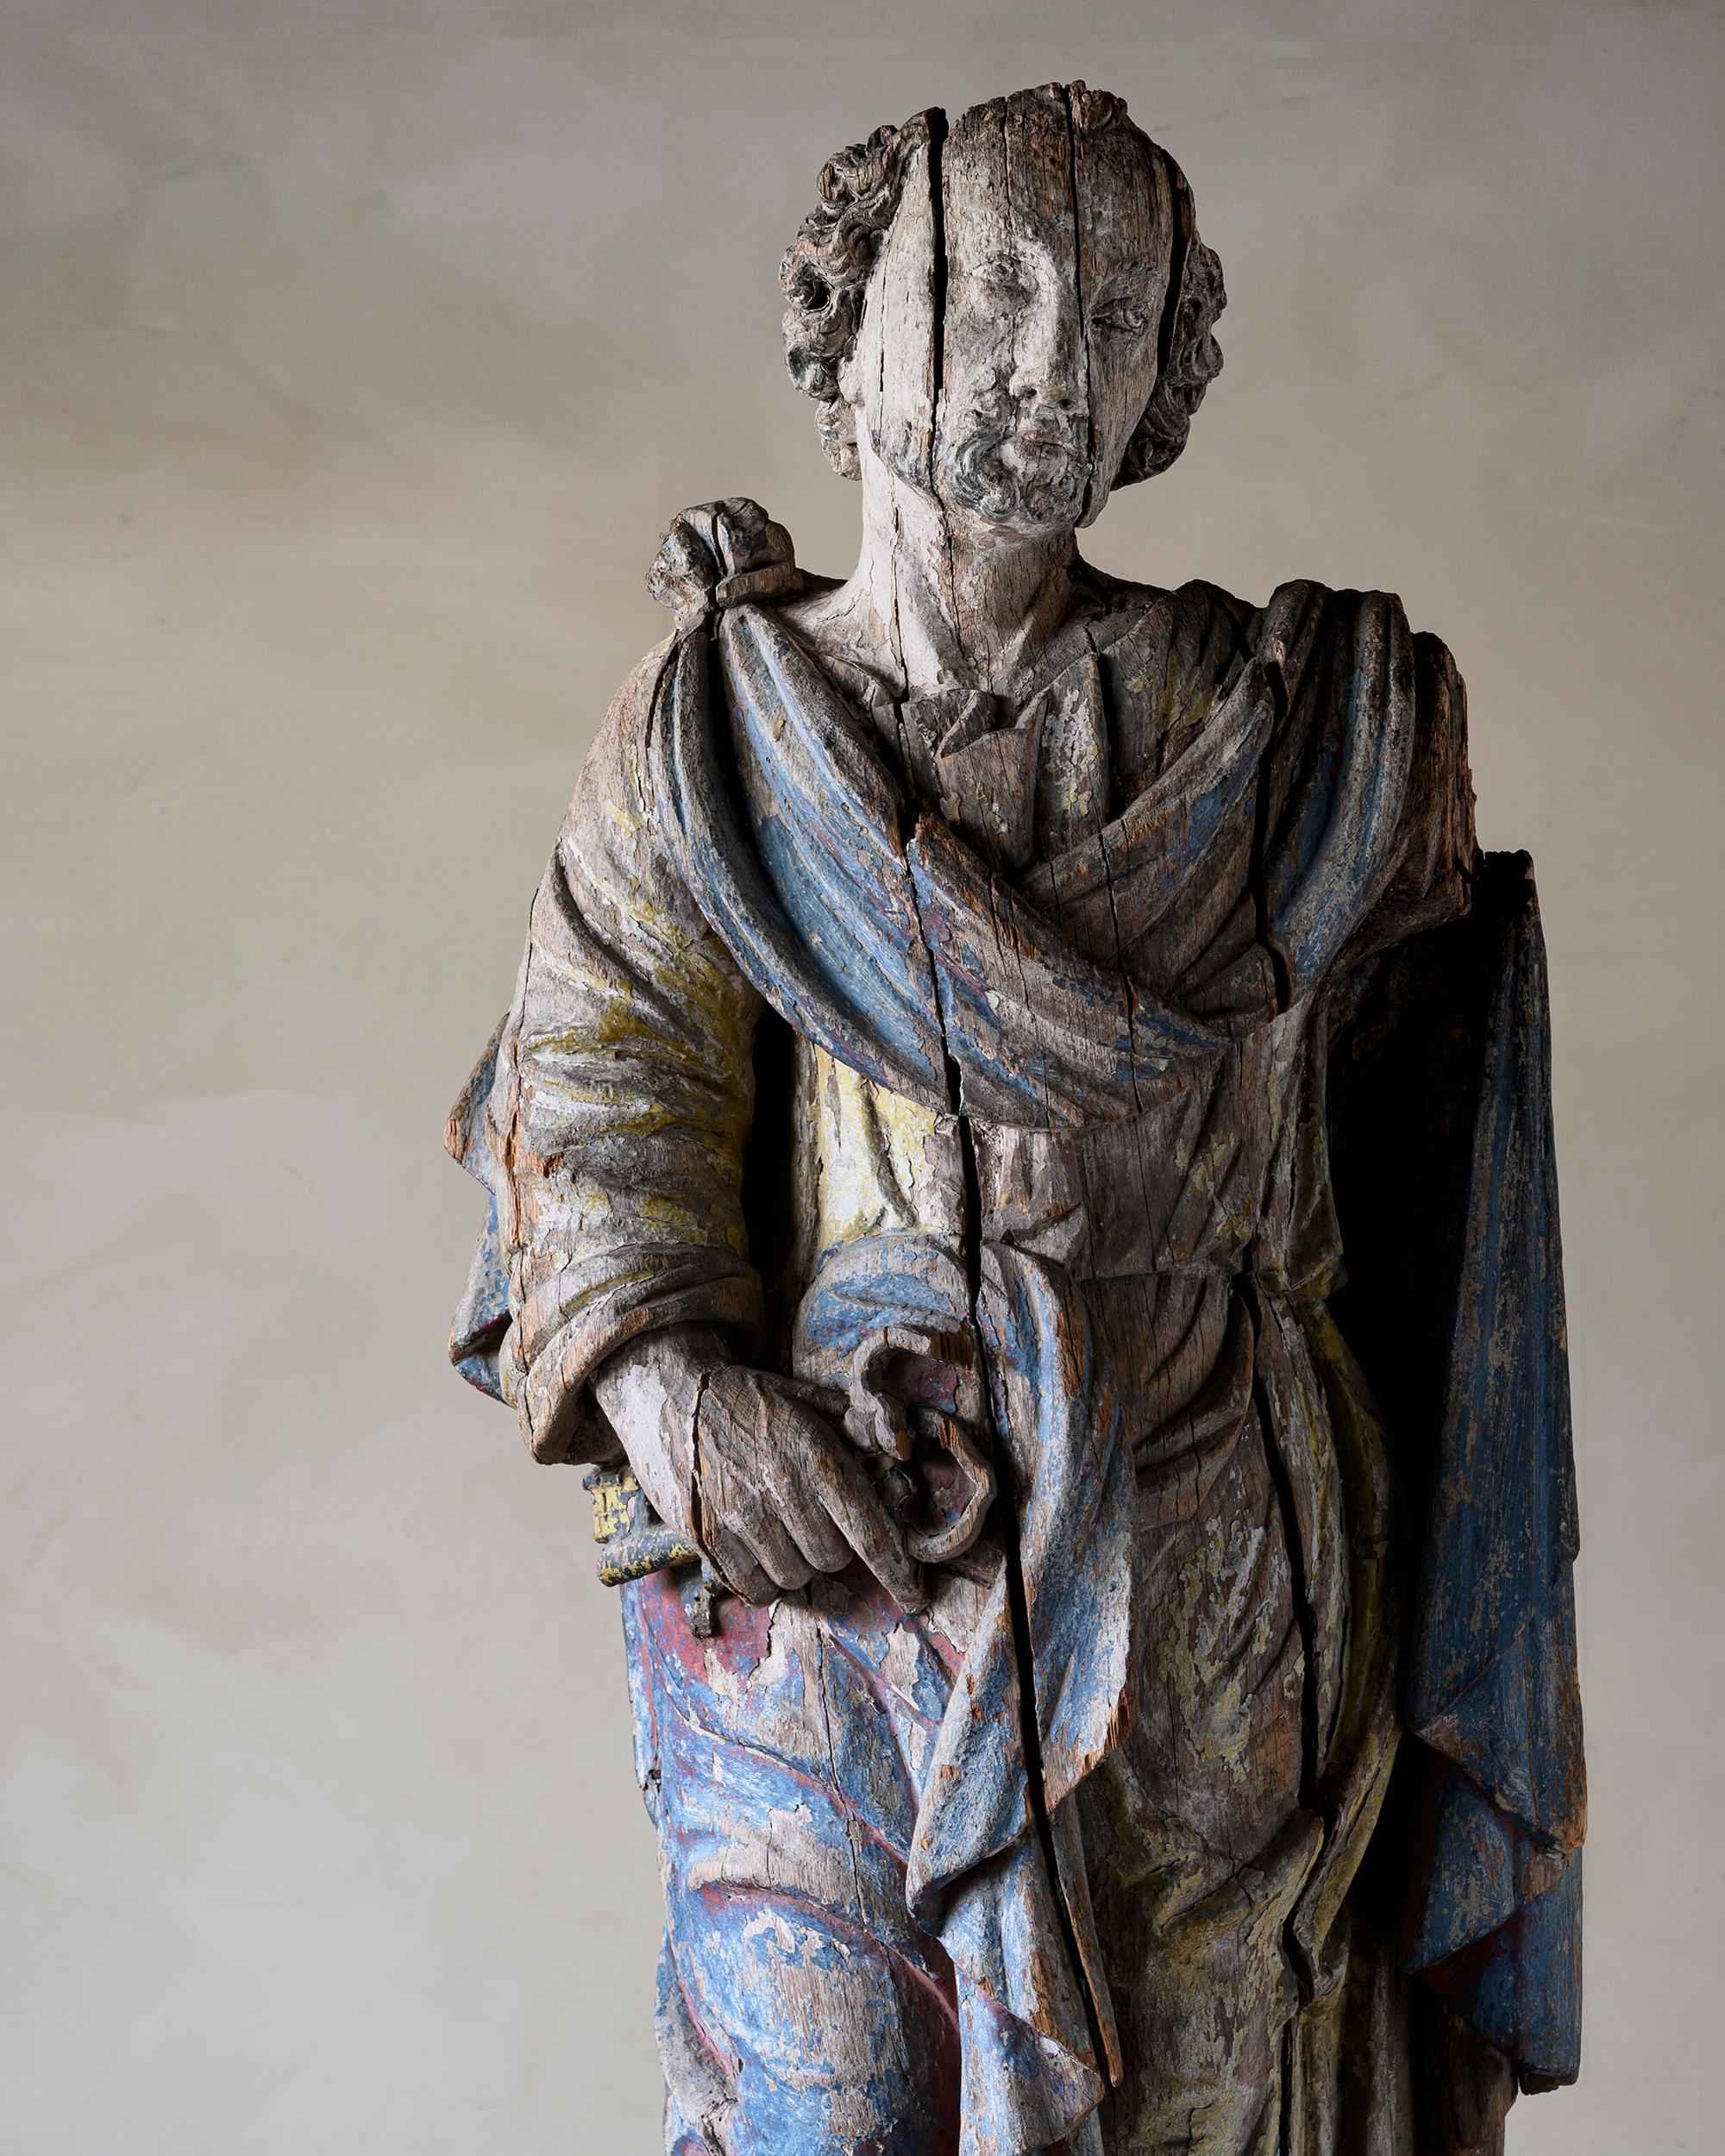 Hand-Carved 17th Century Wooden Sculpture of St Peter